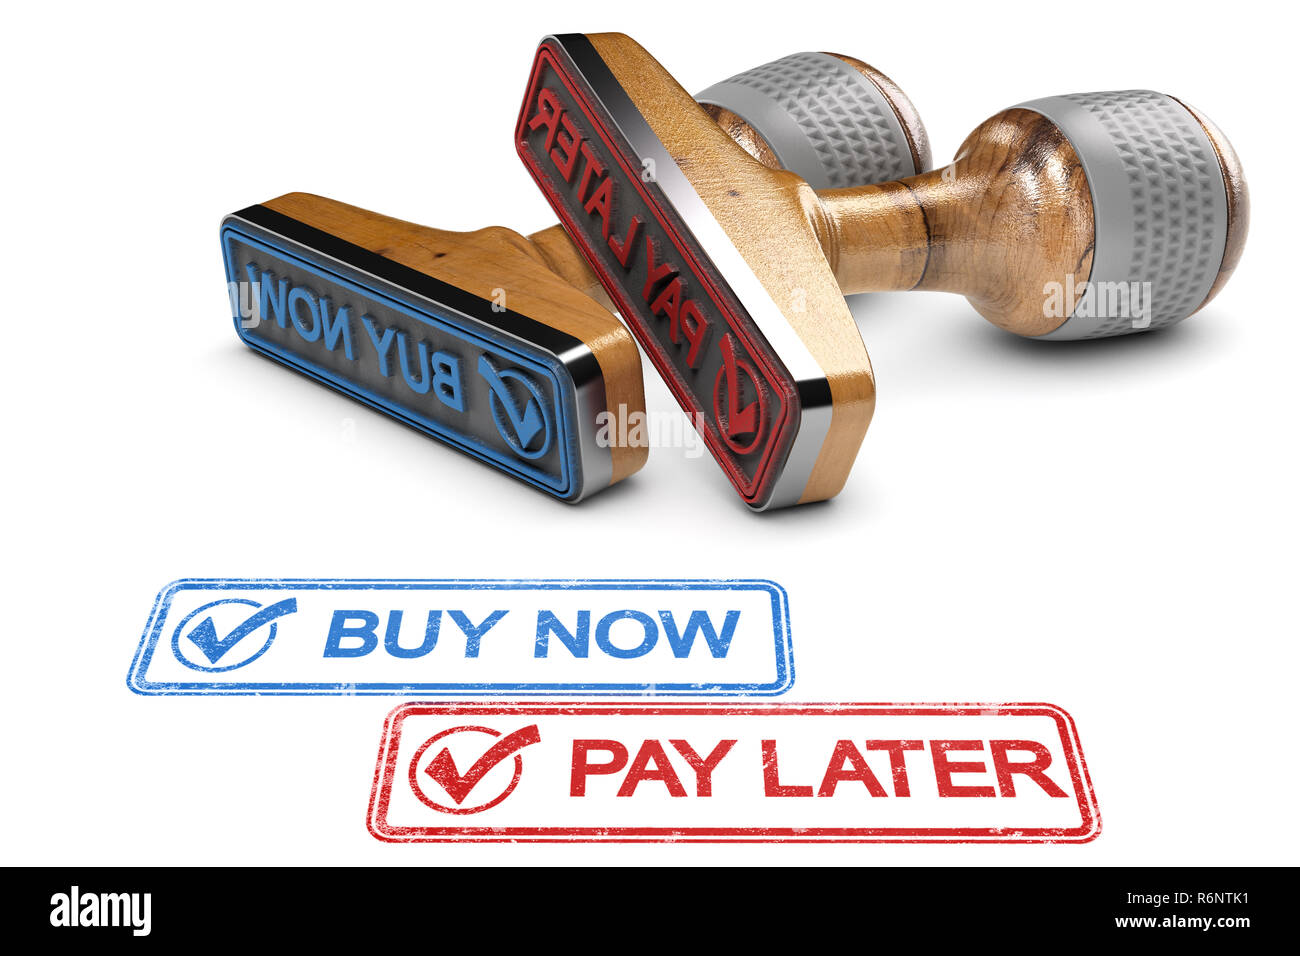 Buy Now Pay Later Stock Photo